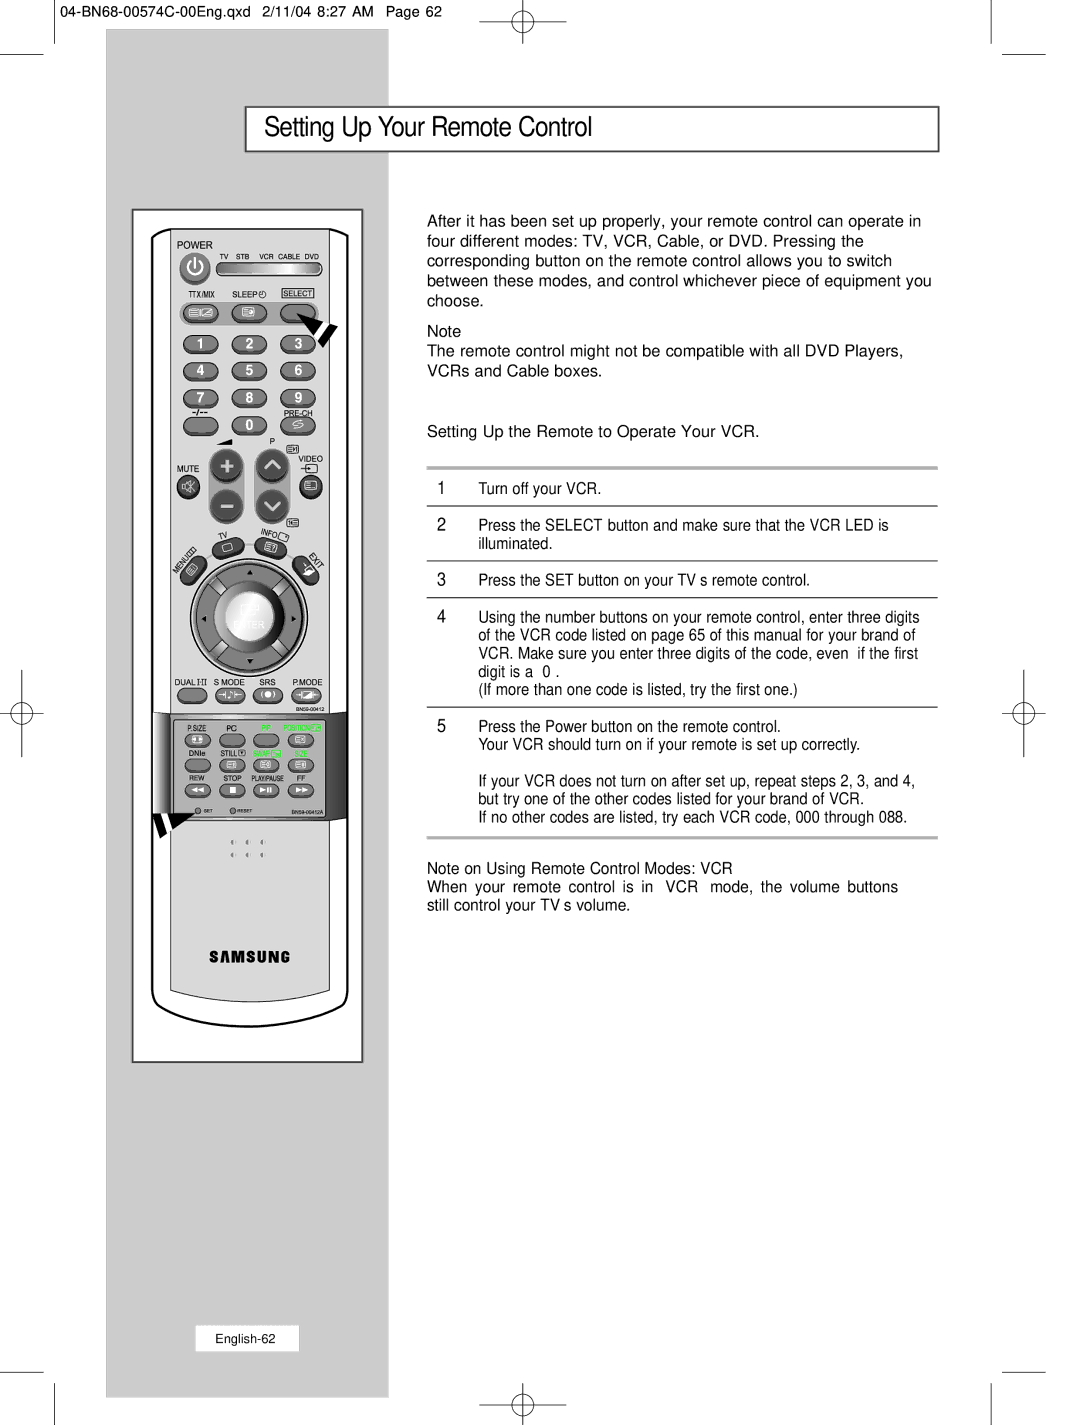 Samsung LW22N23N manual Setting Up Your Remote Control 